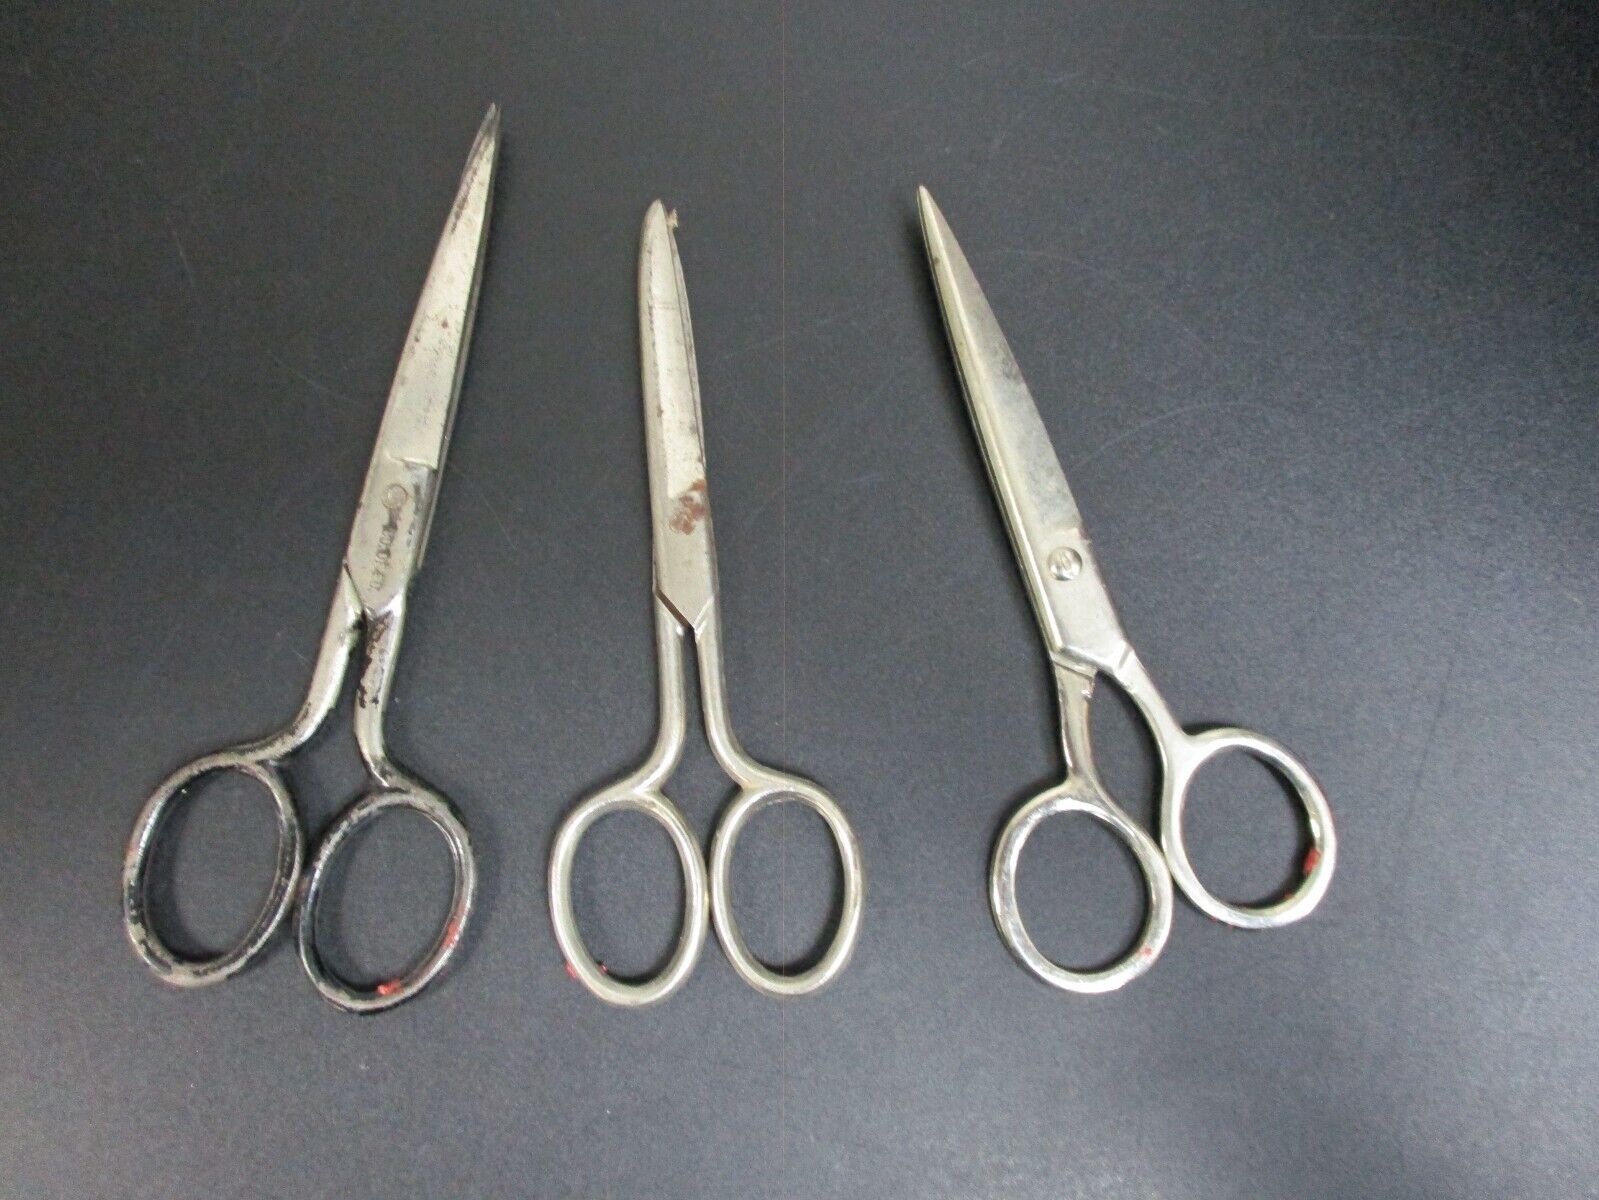 Vintage Small Scissors-Lot Of 3, Cheap